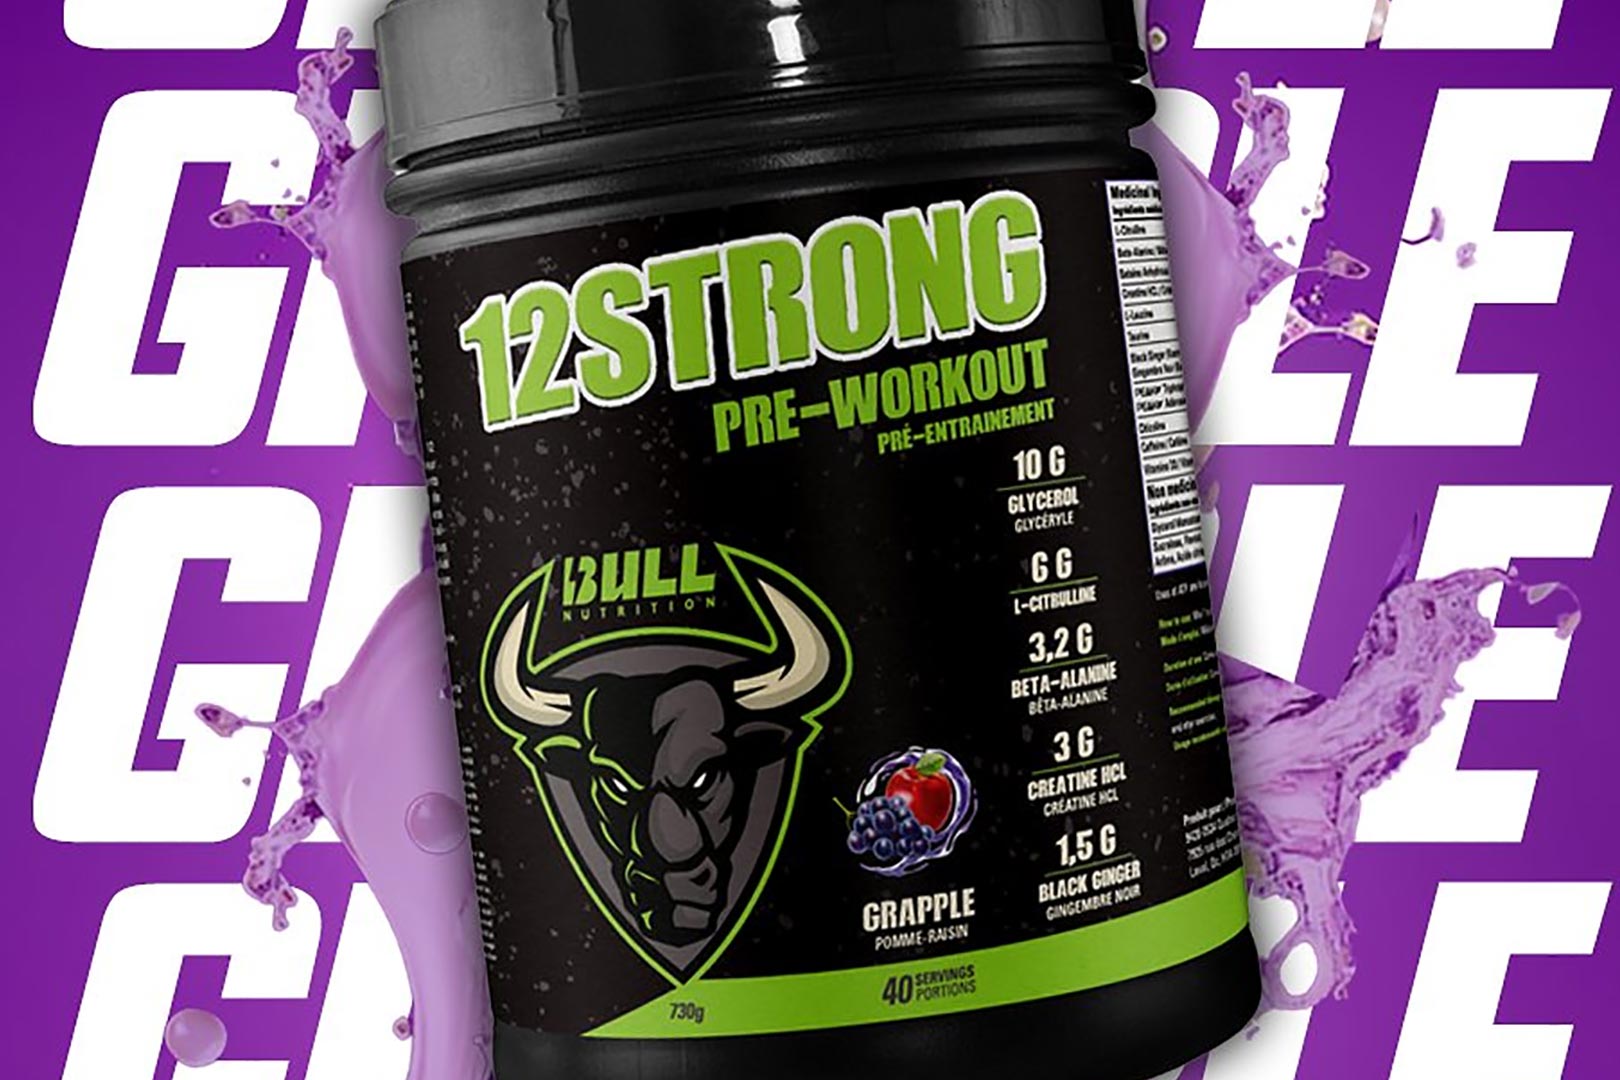 Bull Nutrition Grapple 12 Strong